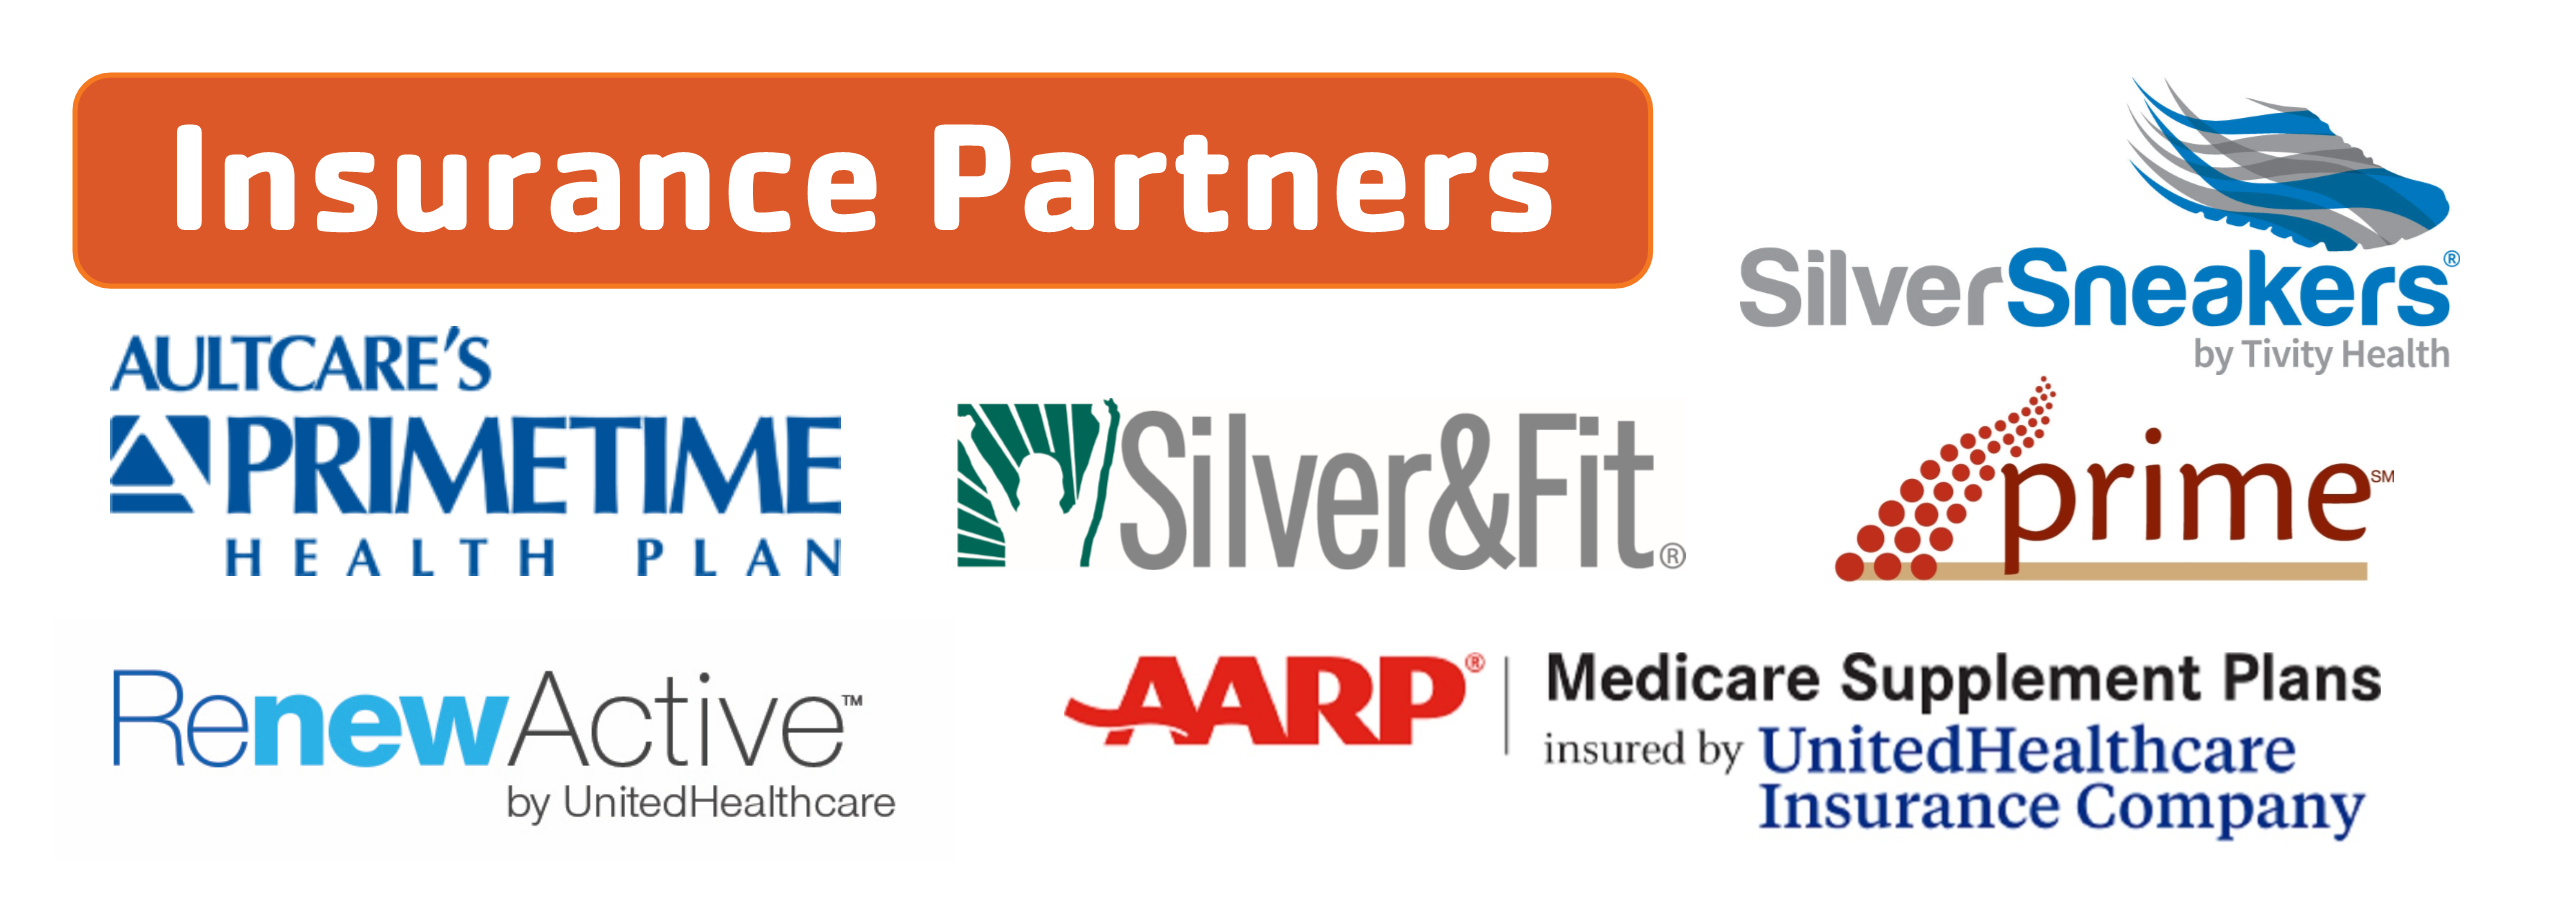 Insurance Partners -SilverSneakers PrimeTime Silver&Fit Prime.png